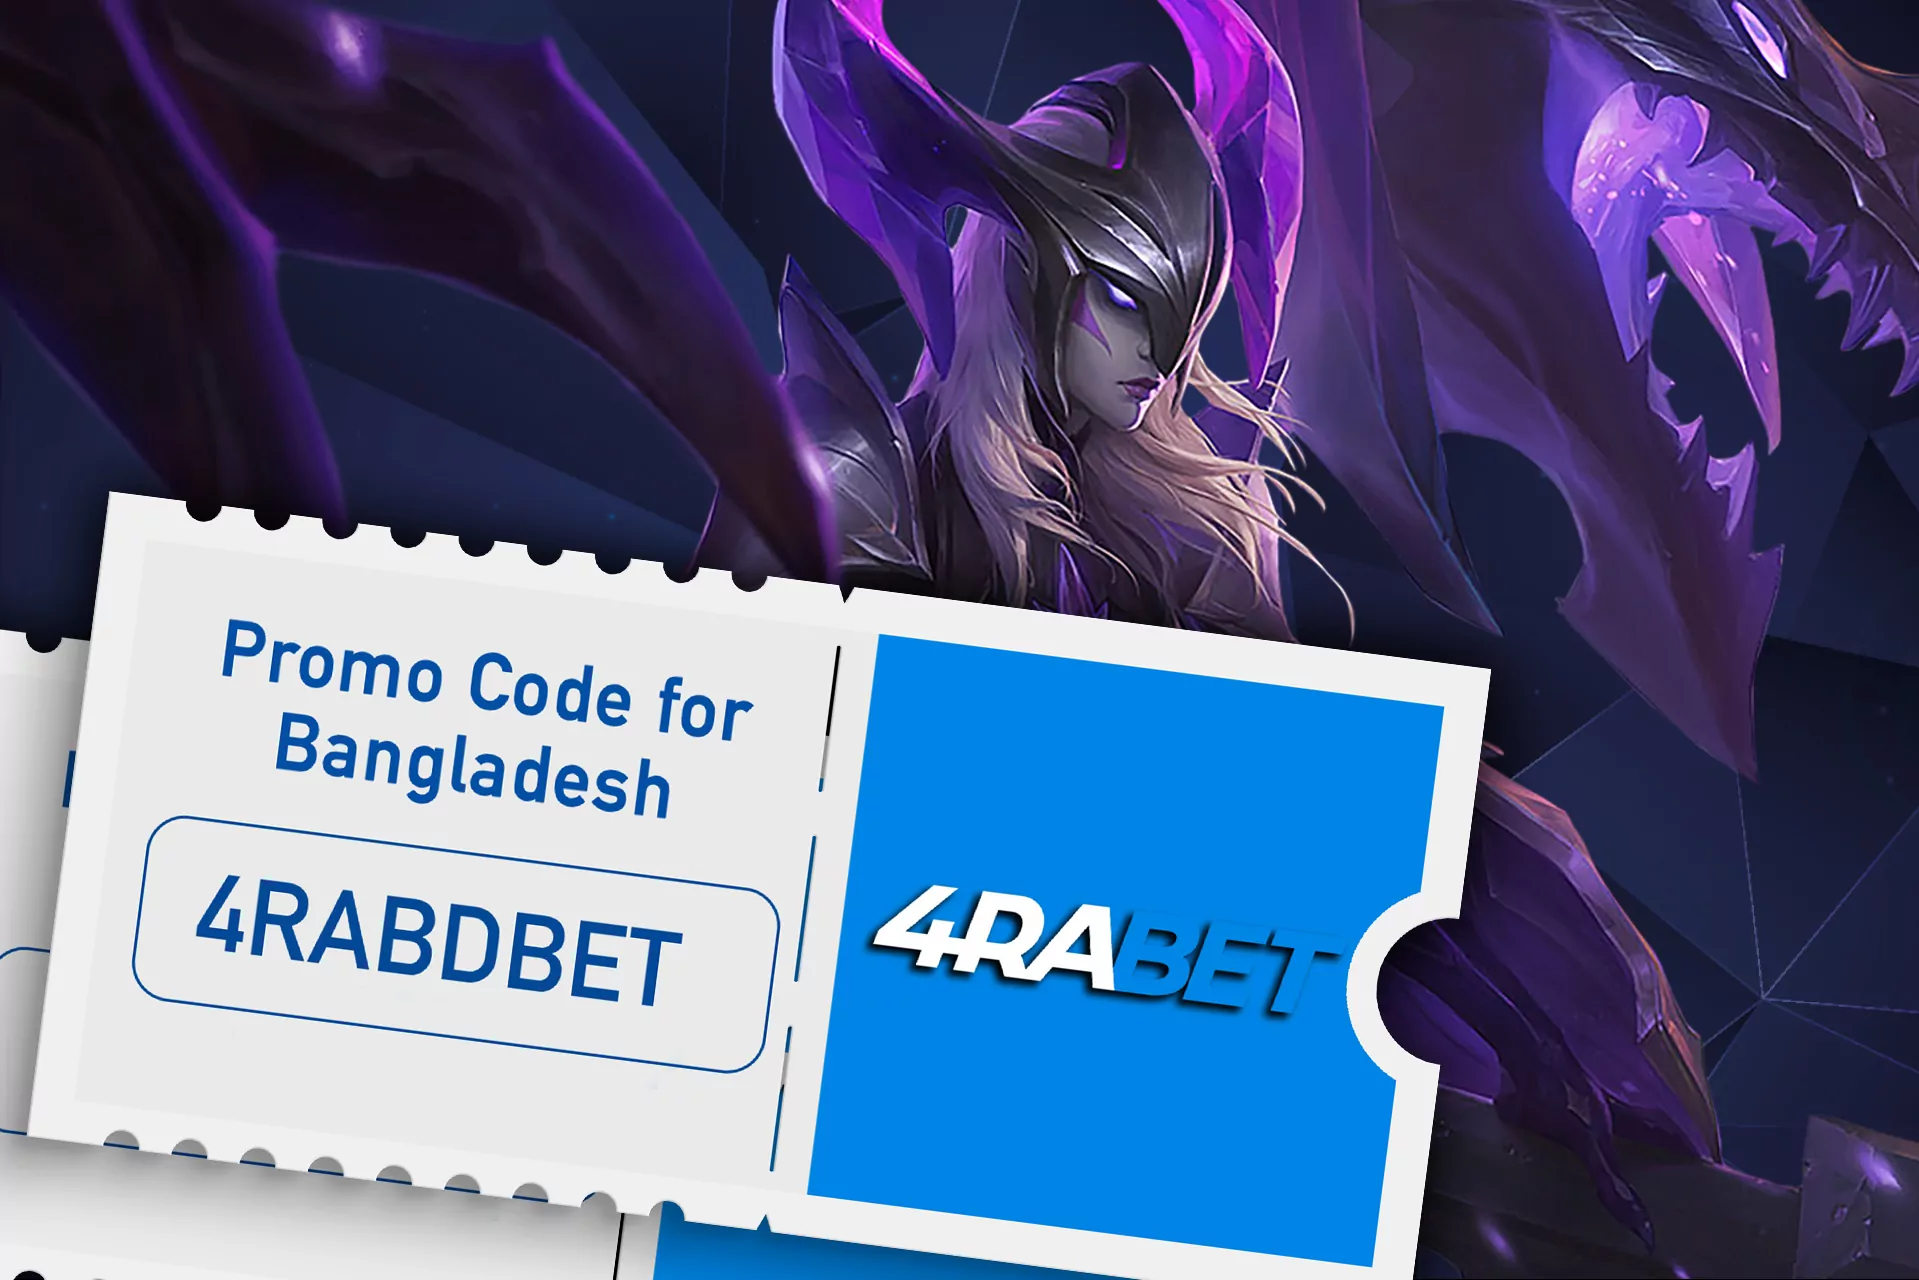 So you can use promo code 4RABDBET for esports and cyber sports.